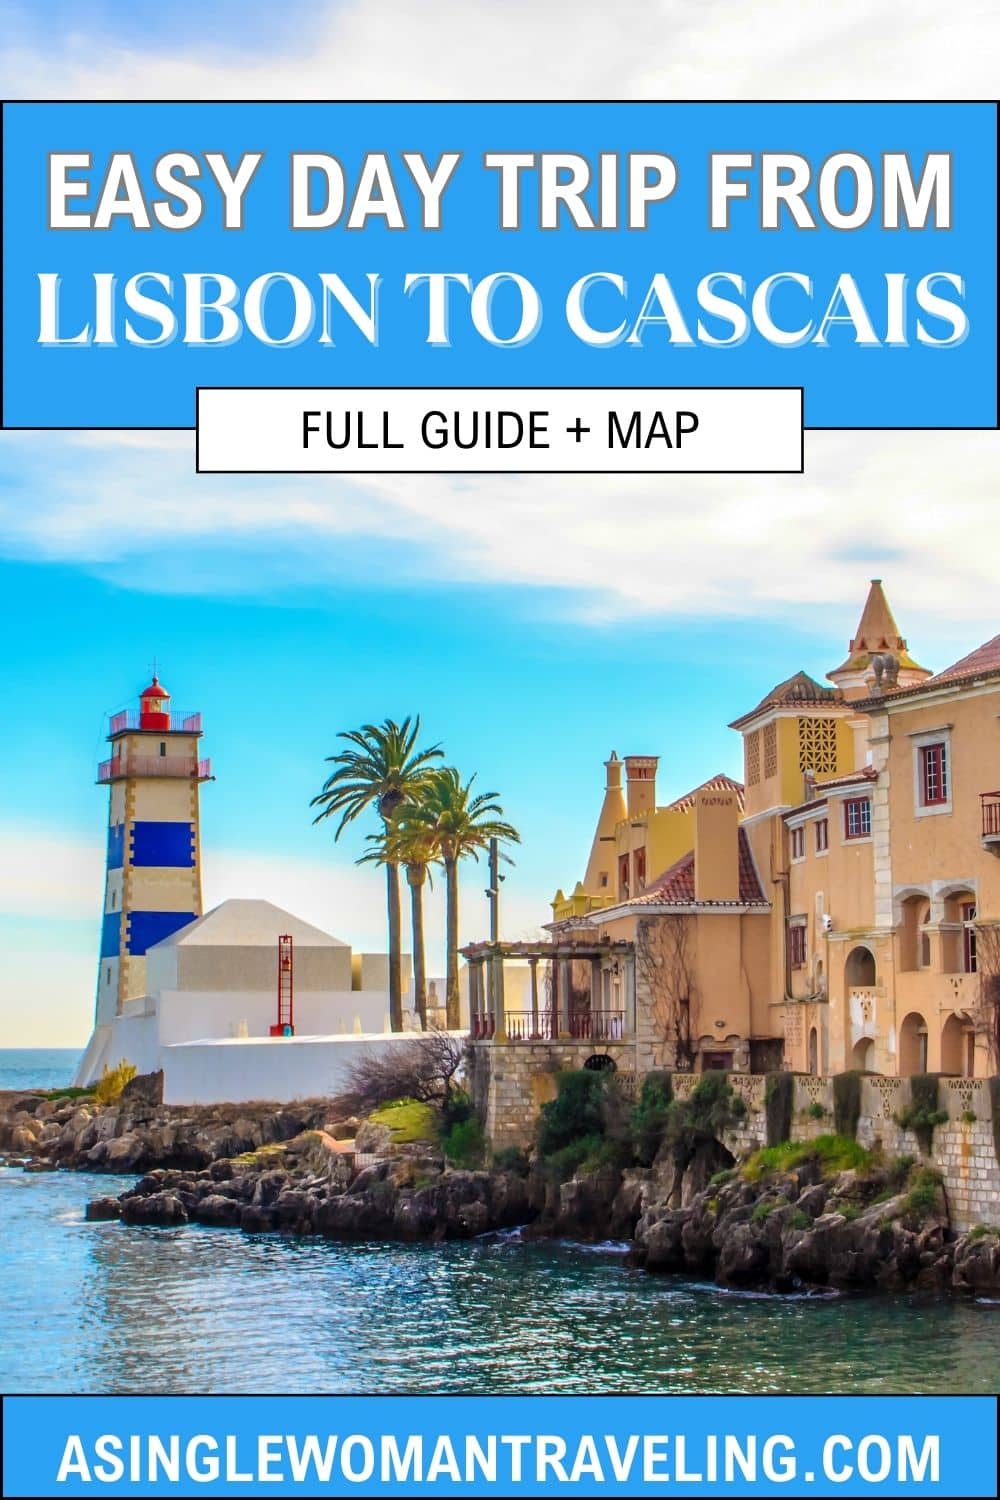 This is a promotional image for a travel guide, featuring a picturesque view of a coastal scene. It has bold text at the top that reads "EASY DAY TRIP FROM LISBON TO CASCAIS" with additional text below stating "FULL GUIDE + MAP". The photo in the background shows a charming lighthouse with distinctive blue and white stripes, standing near a cluster of classic European buildings with terracotta roofs. There are palm trees and a calm sea, which suggests a tranquil and attractive destination.